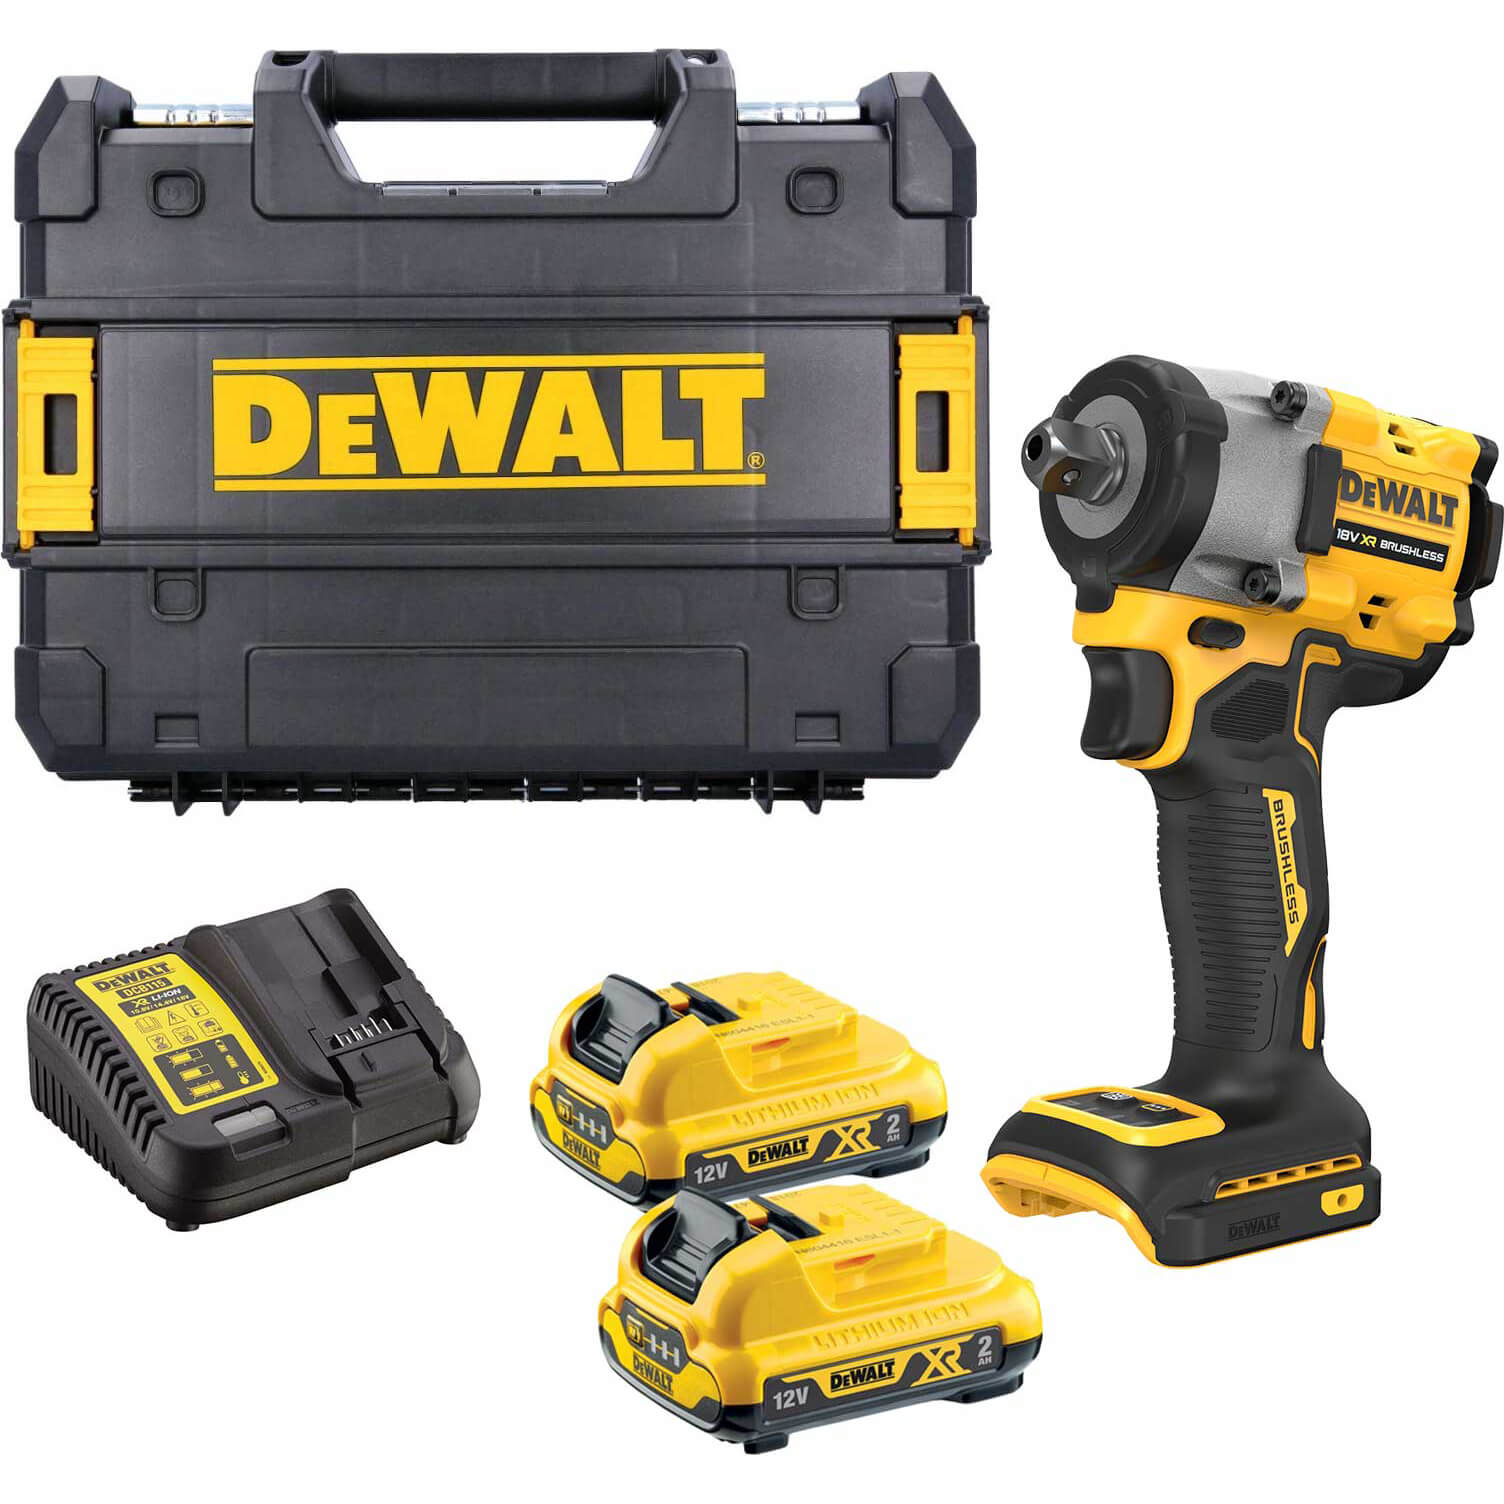 DeWalt DCF922 18v XR Cordless Brushless 1/2" Compact Impact Wrench 2 x 2ah Li-ion Charger Case